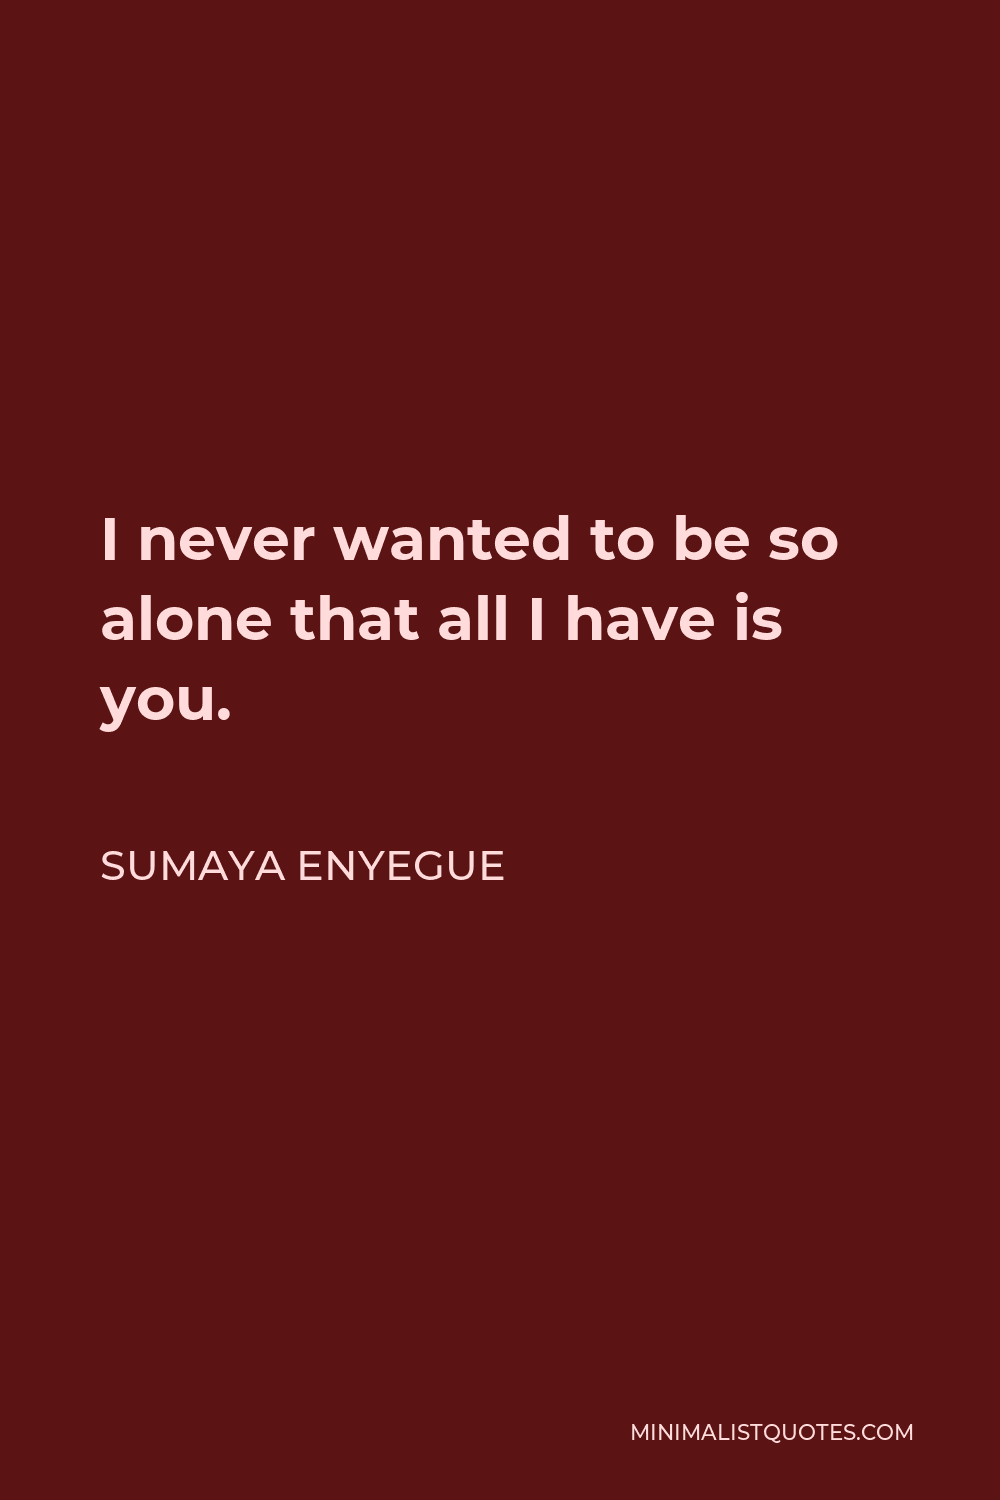 Sumaya Enyegue Quote - I never wanted to be so alone that all I have is you.